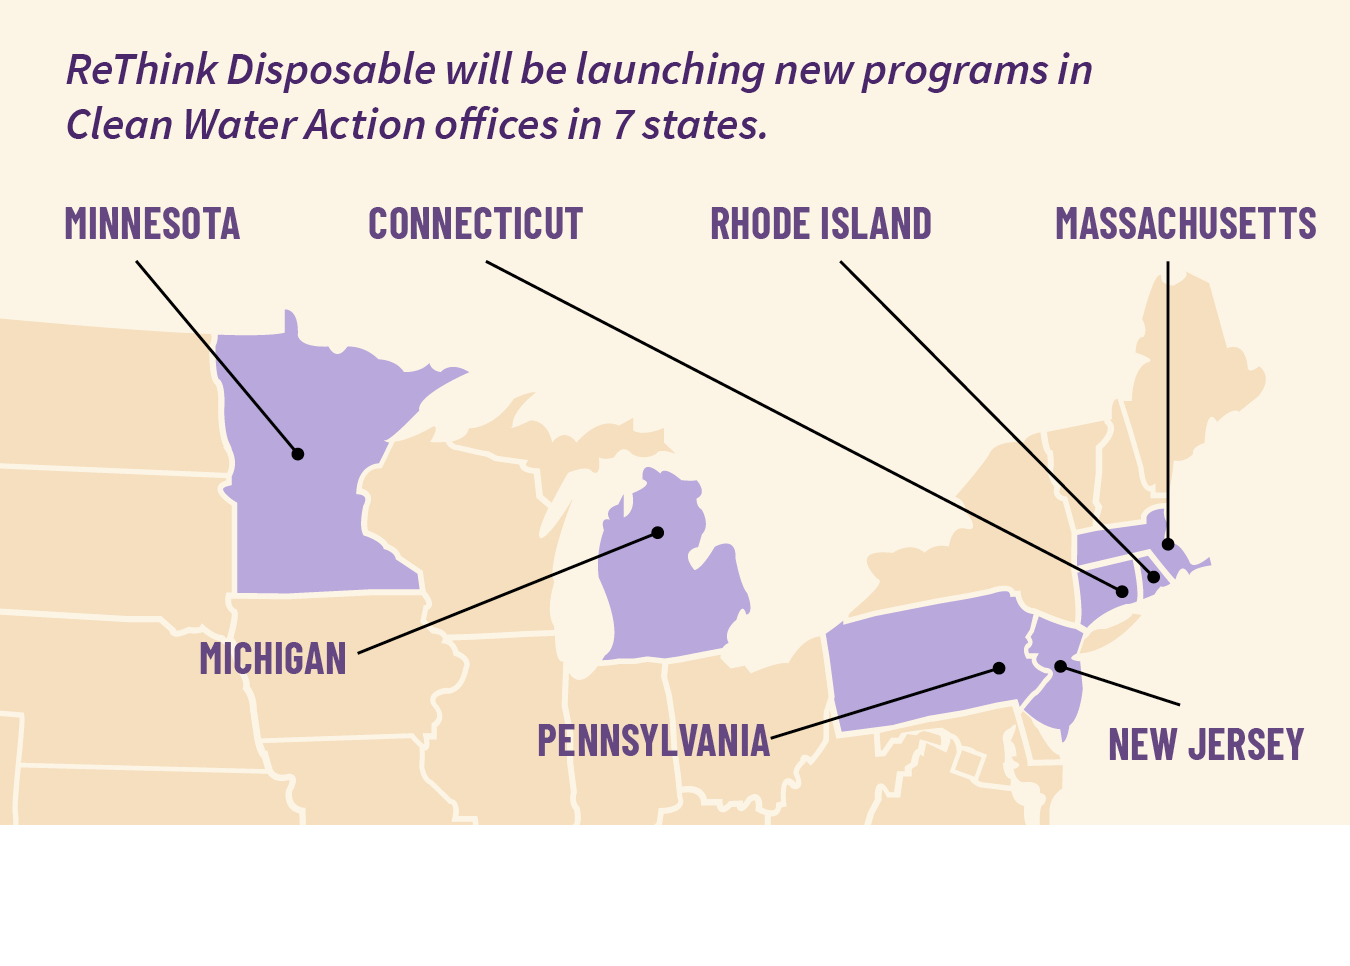 ReThink Disposable will be launching new programs in Clean Water Action offices in 7 states (MN, MI, CT, PA, RI, MA, NJ)